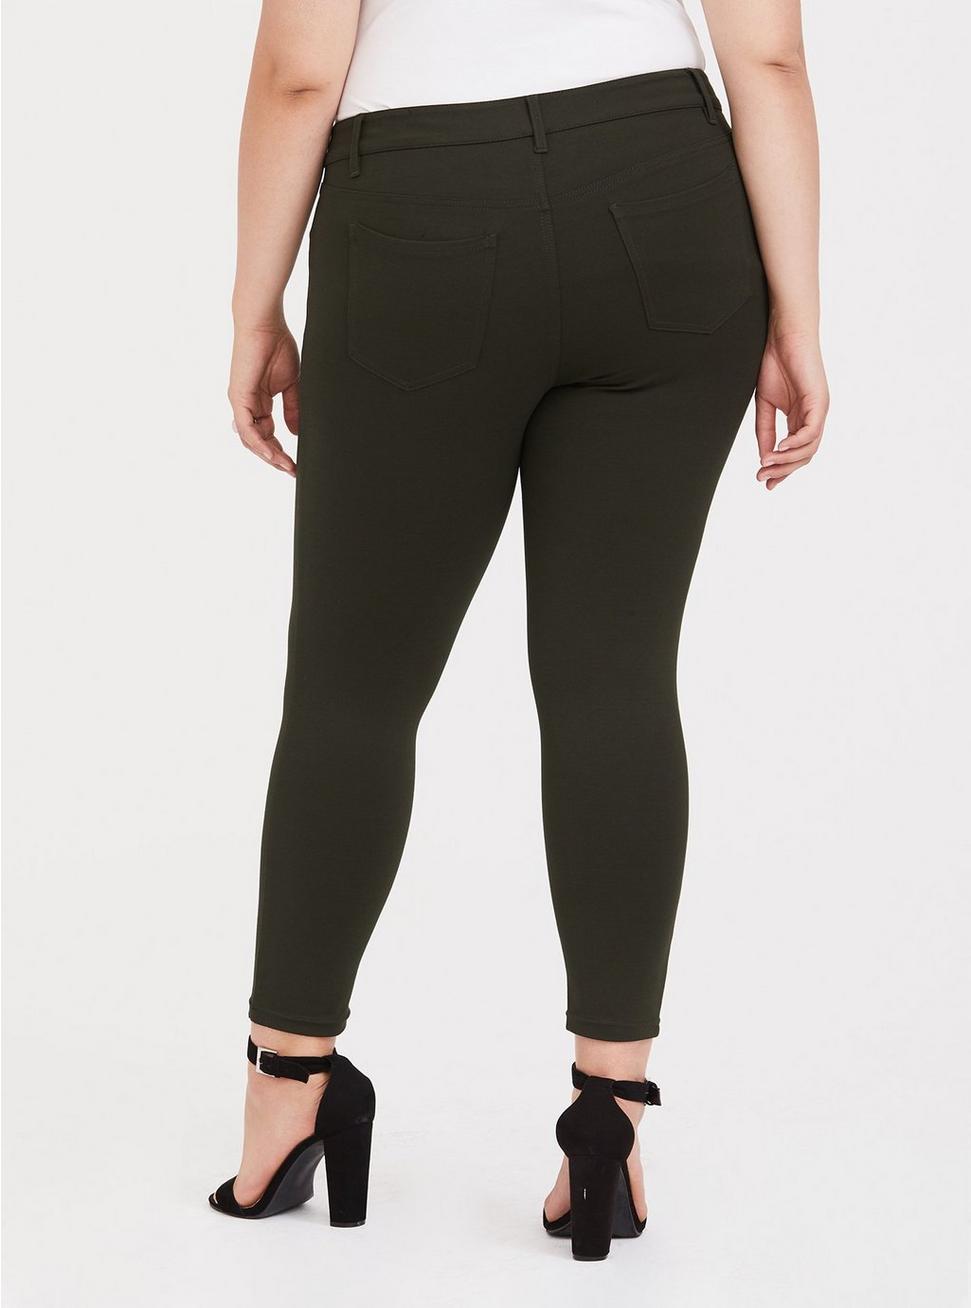 Plus Size - Ponte Stretch Ankle Skinny Pant - Forest Green - Torrid